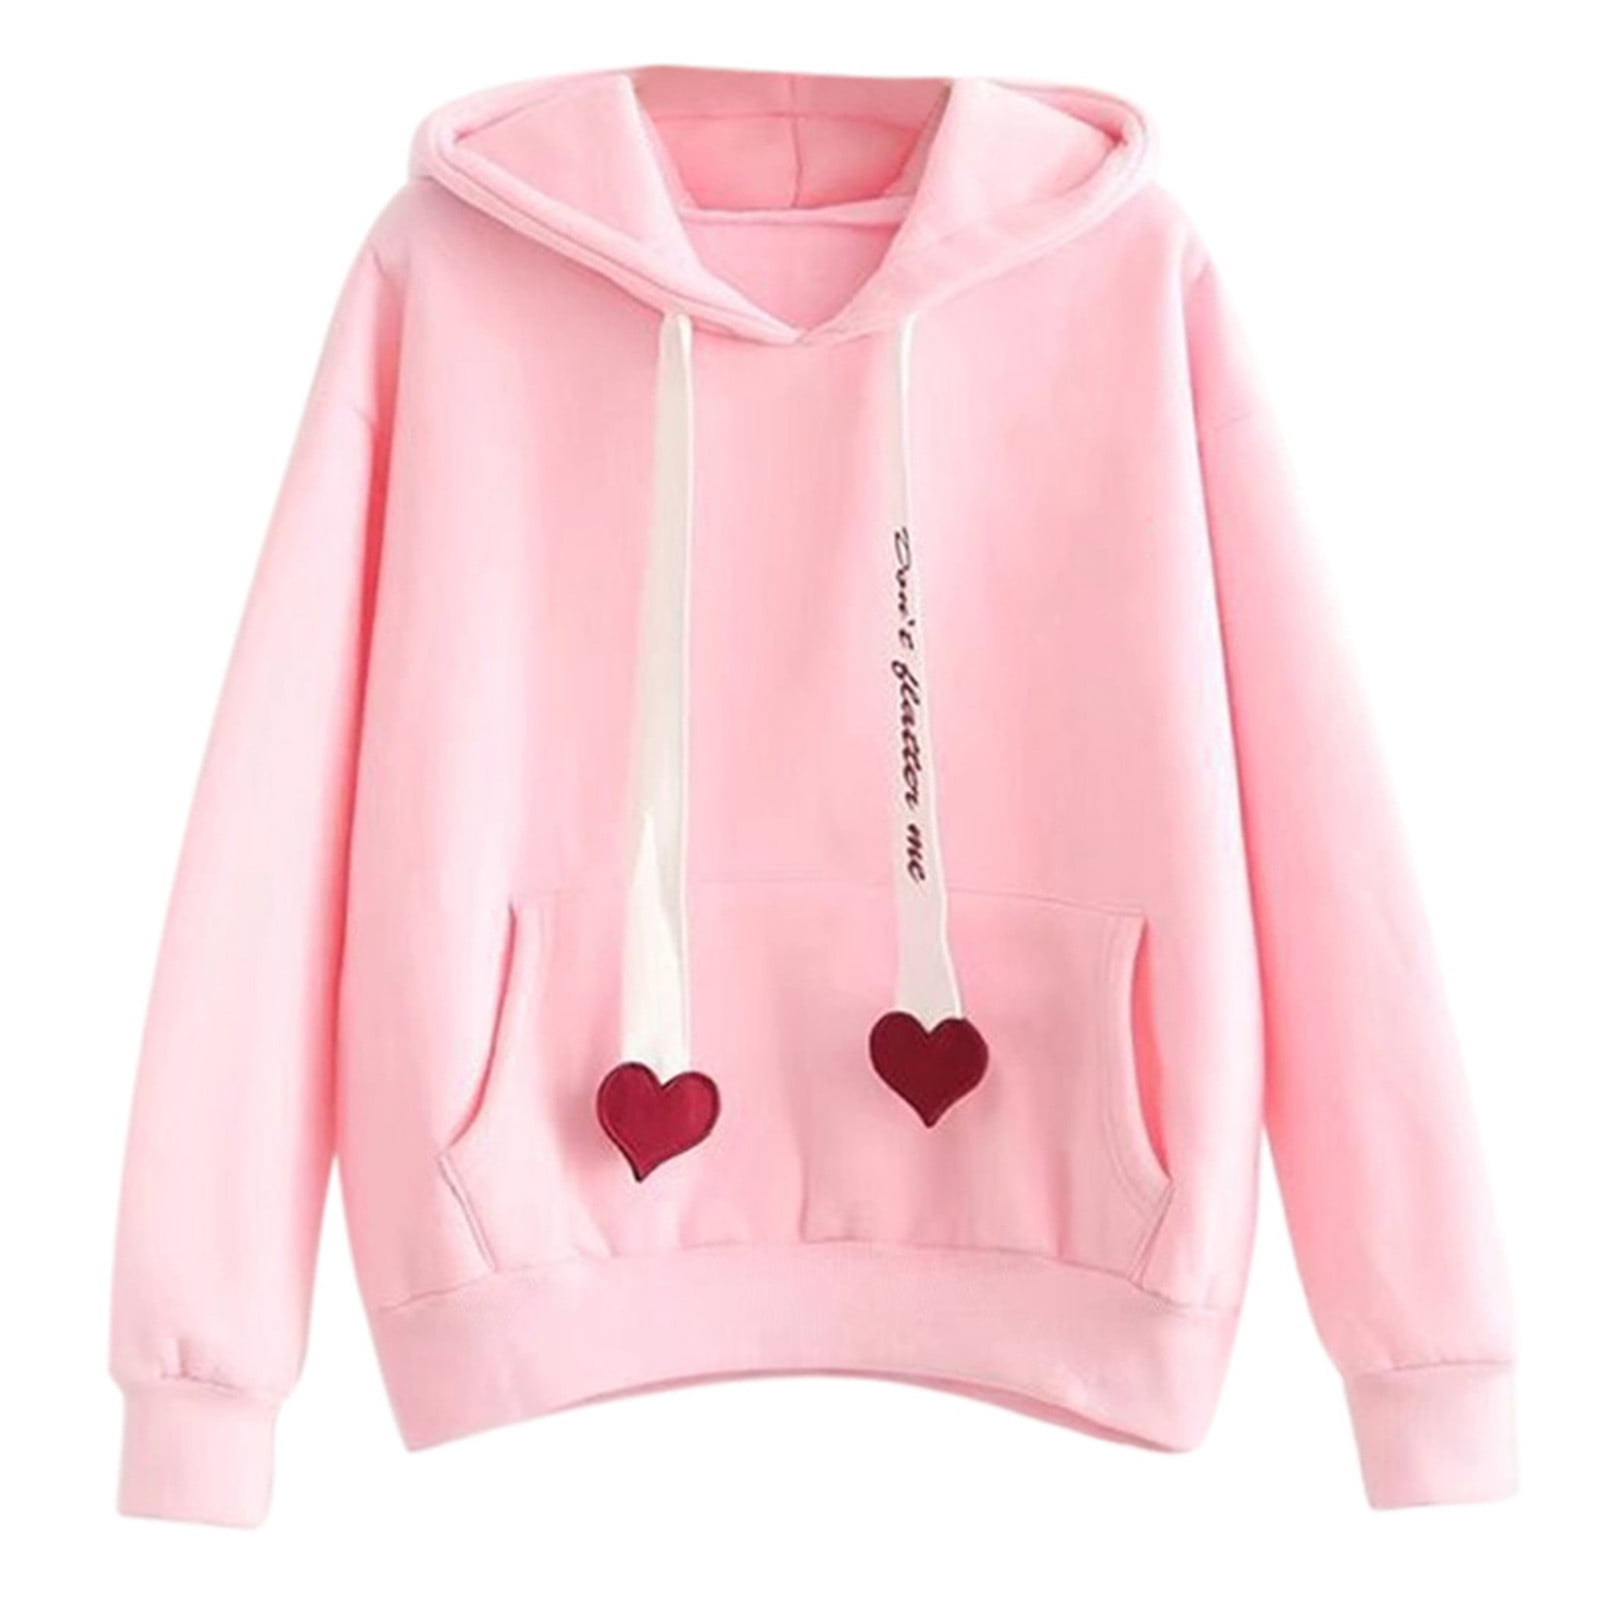 Aopirta e+fan sweatshirt, sweatshirt y2k, mamacita sweatshirt,lightning  deals of today prime clearance,my orders placed recently by me,  warehouse sale clearance White at  Women's Clothing store